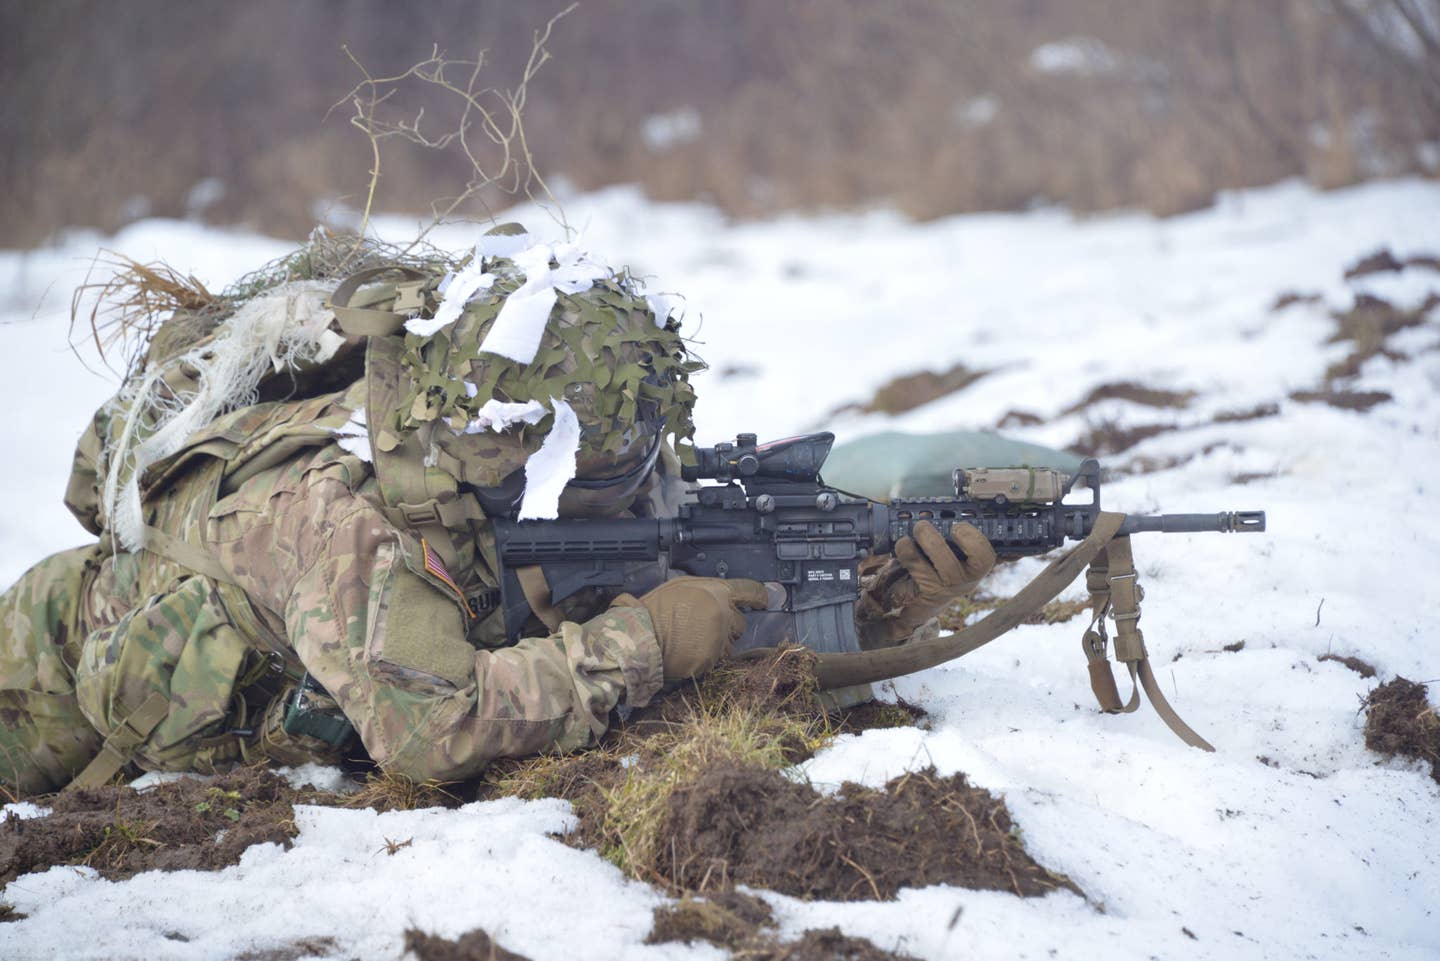 A U.S. Army Paratrooper, assigned to 2nd Battalion, 503rd Infantry Regiment, 173rd Airborne Brigade, engages targets during a recon and sniper break contact live fire exercise at Grafenwoehr Training Area, Germany, Feb. 6, 2017. (U.S. Army photo by Visual Information Specialist Gerhard Seuffert)